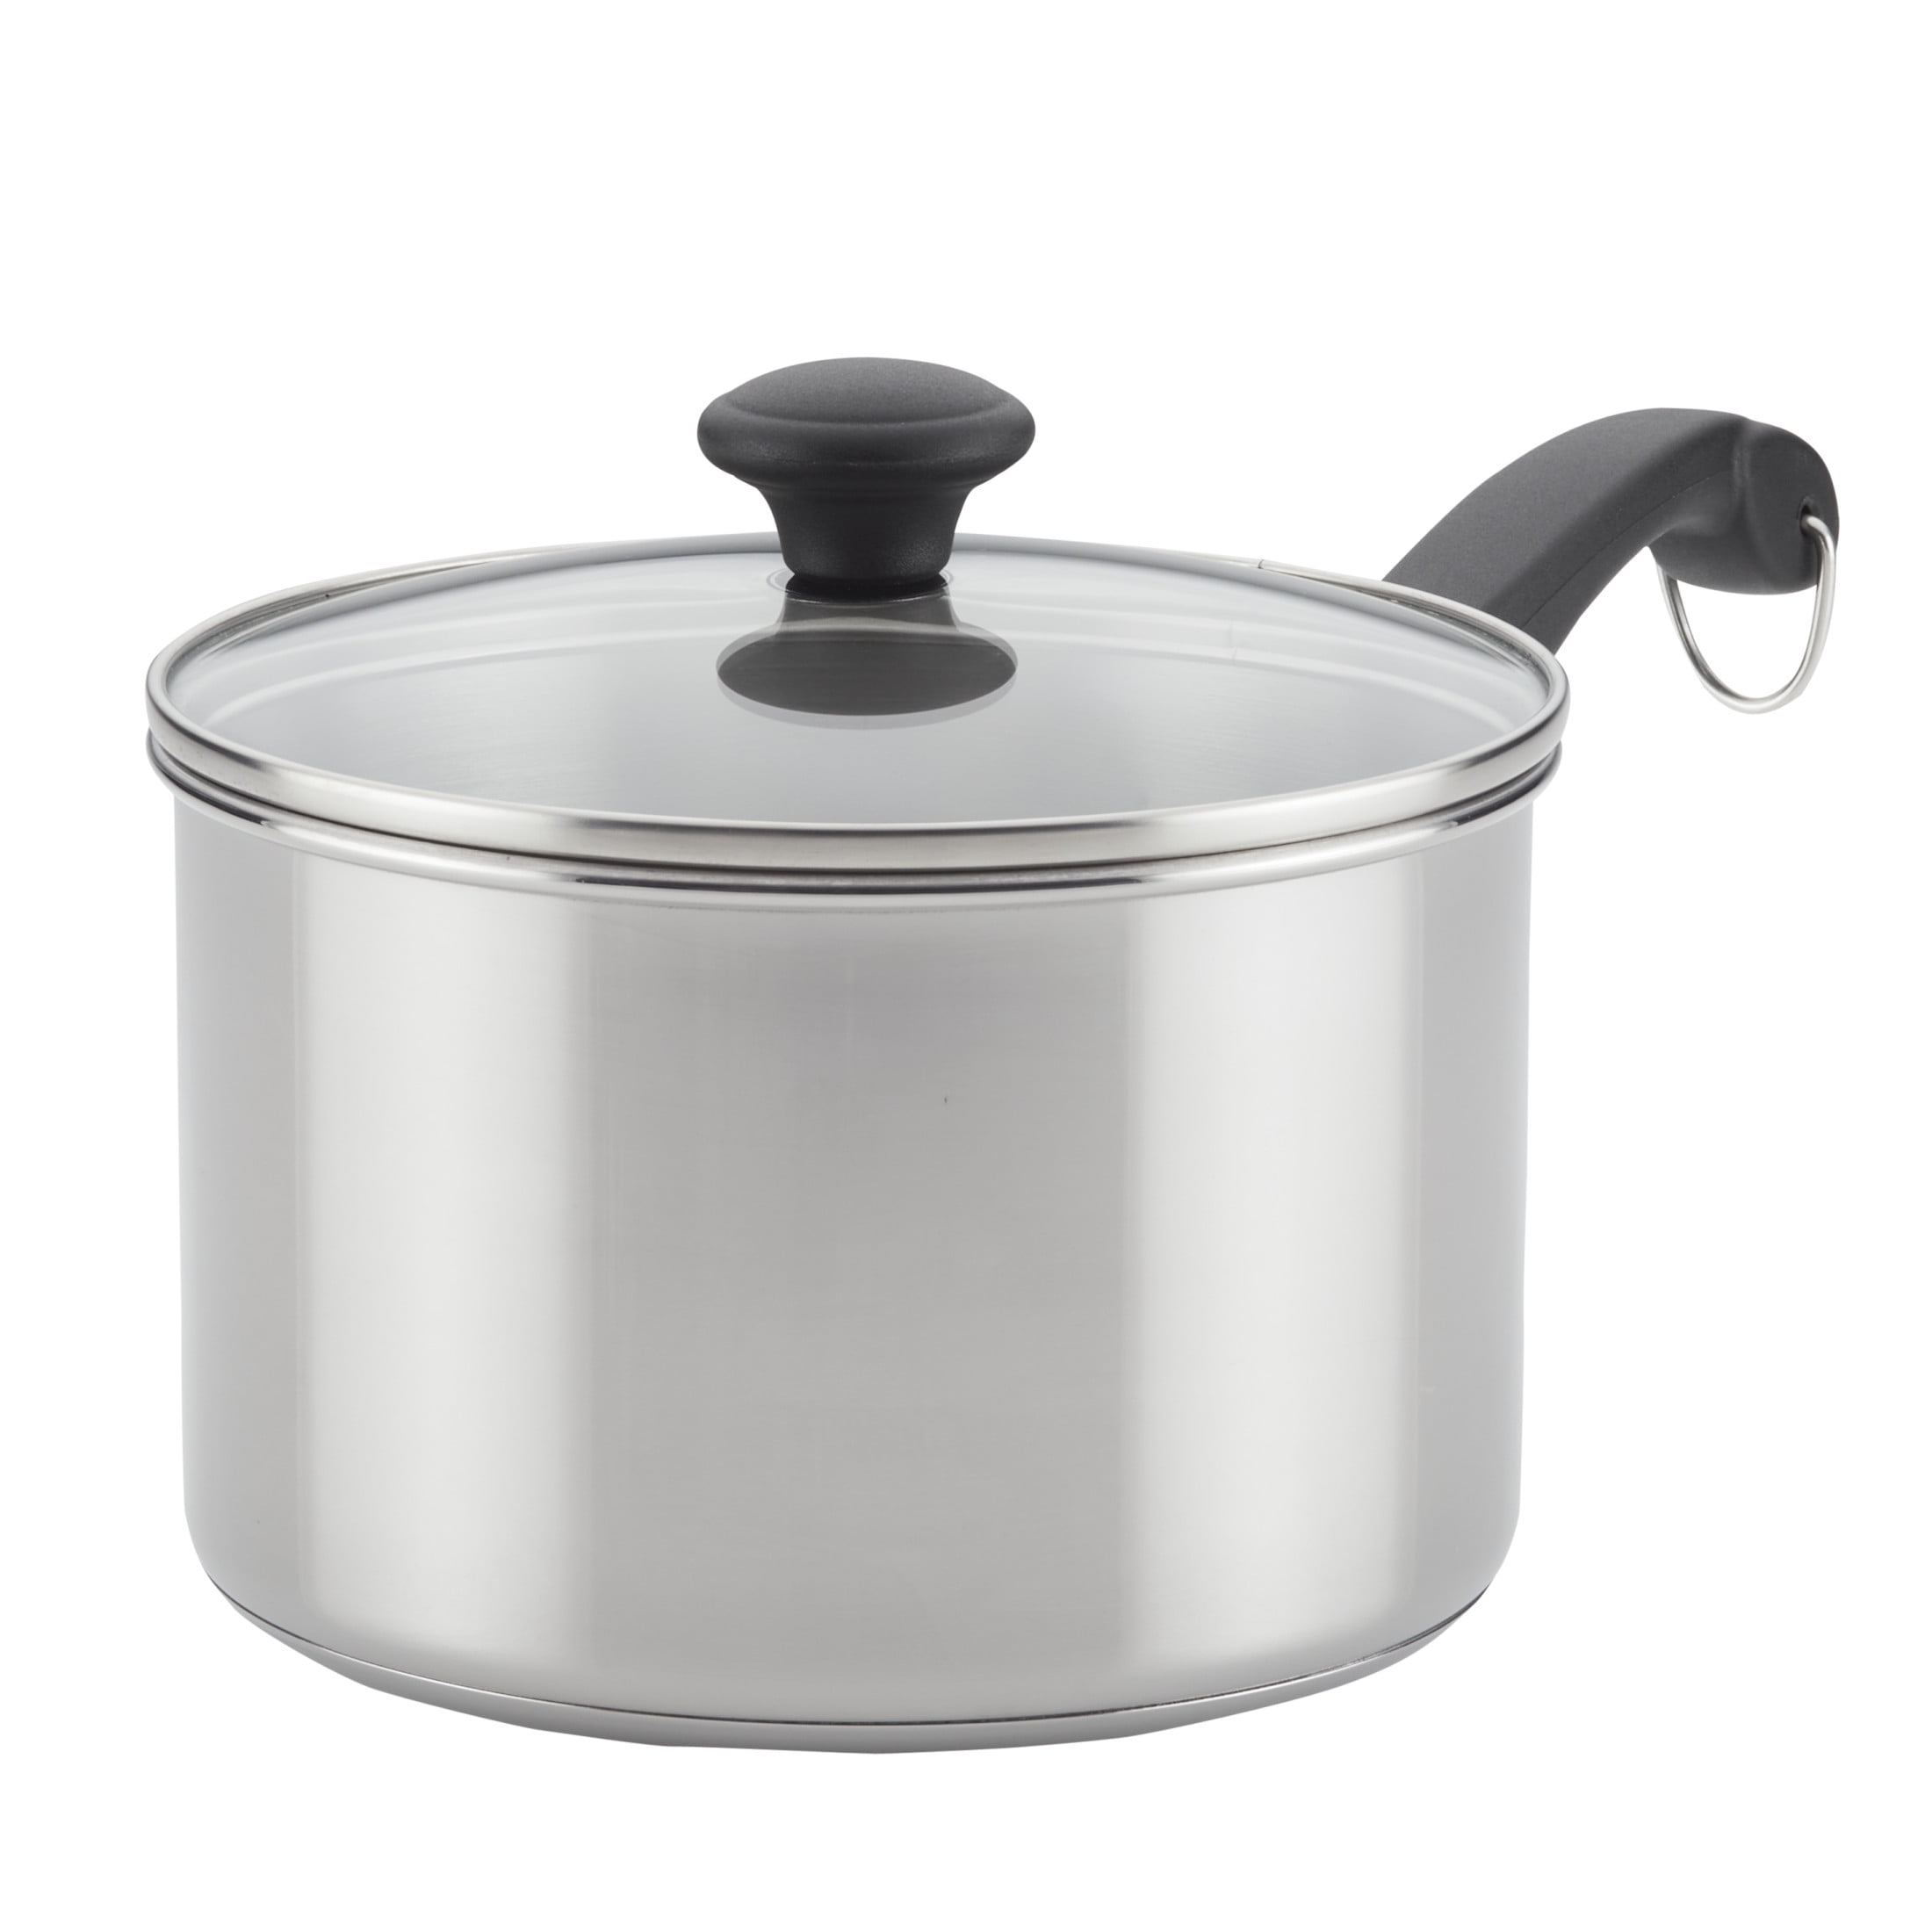 Farberware Classic Stainless Steel Sauce Pan/Saucepan with Lid, 3 Quart,  Silver & Classic Stainless Steel 4-Quart Covered Saucepot - - Silver